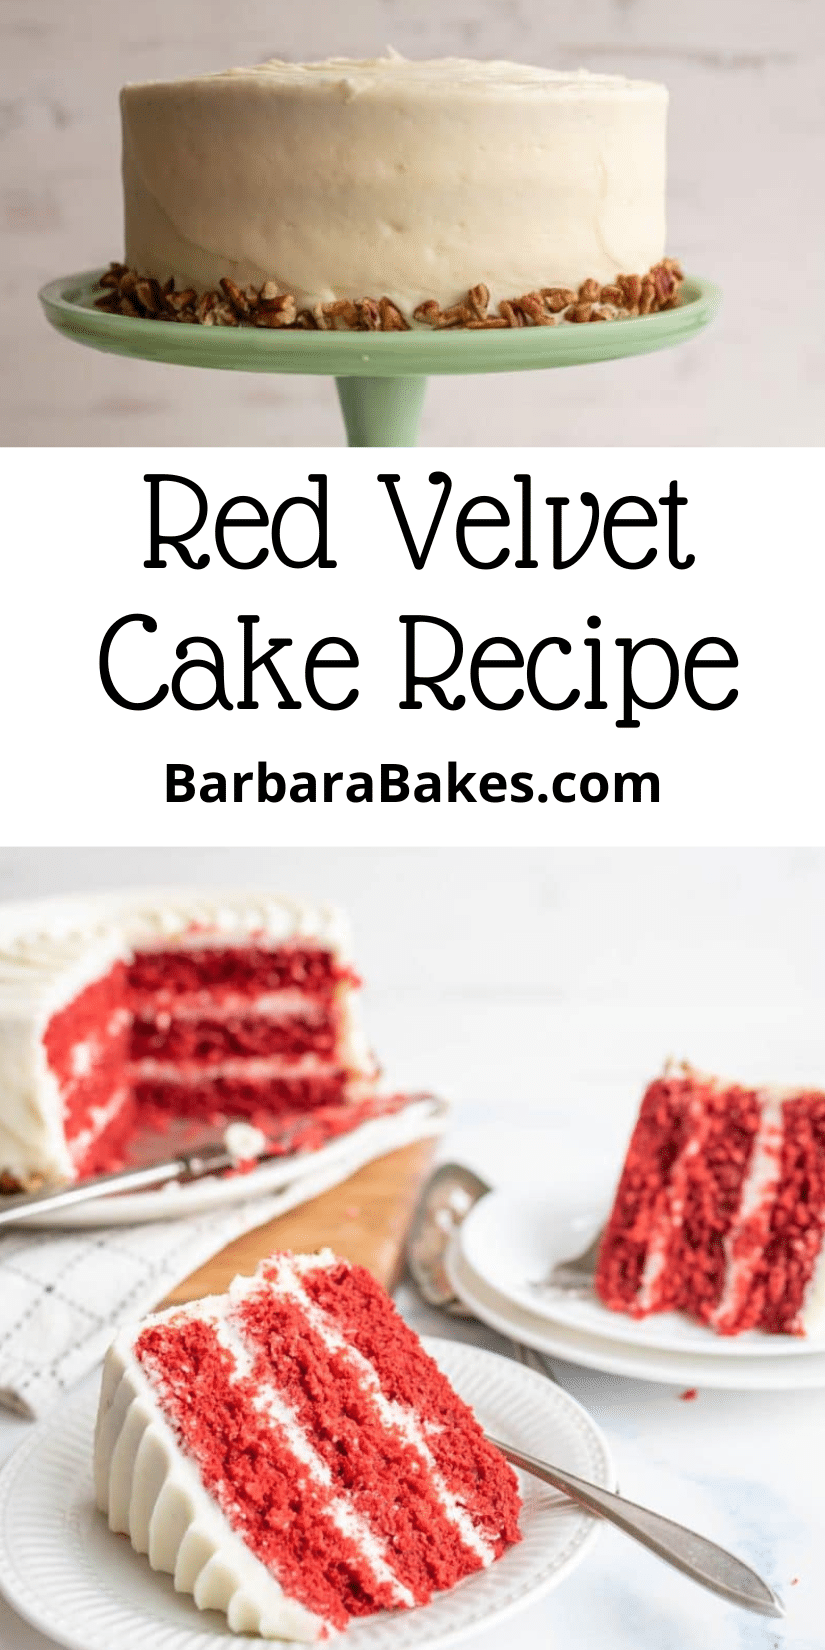 The classic Red Velvet Cake has always been a crowd pleaser for it’s beautiful color, taste and flavor. This cake is moist and delicious-perfect for any occasion. via @barbarabakes